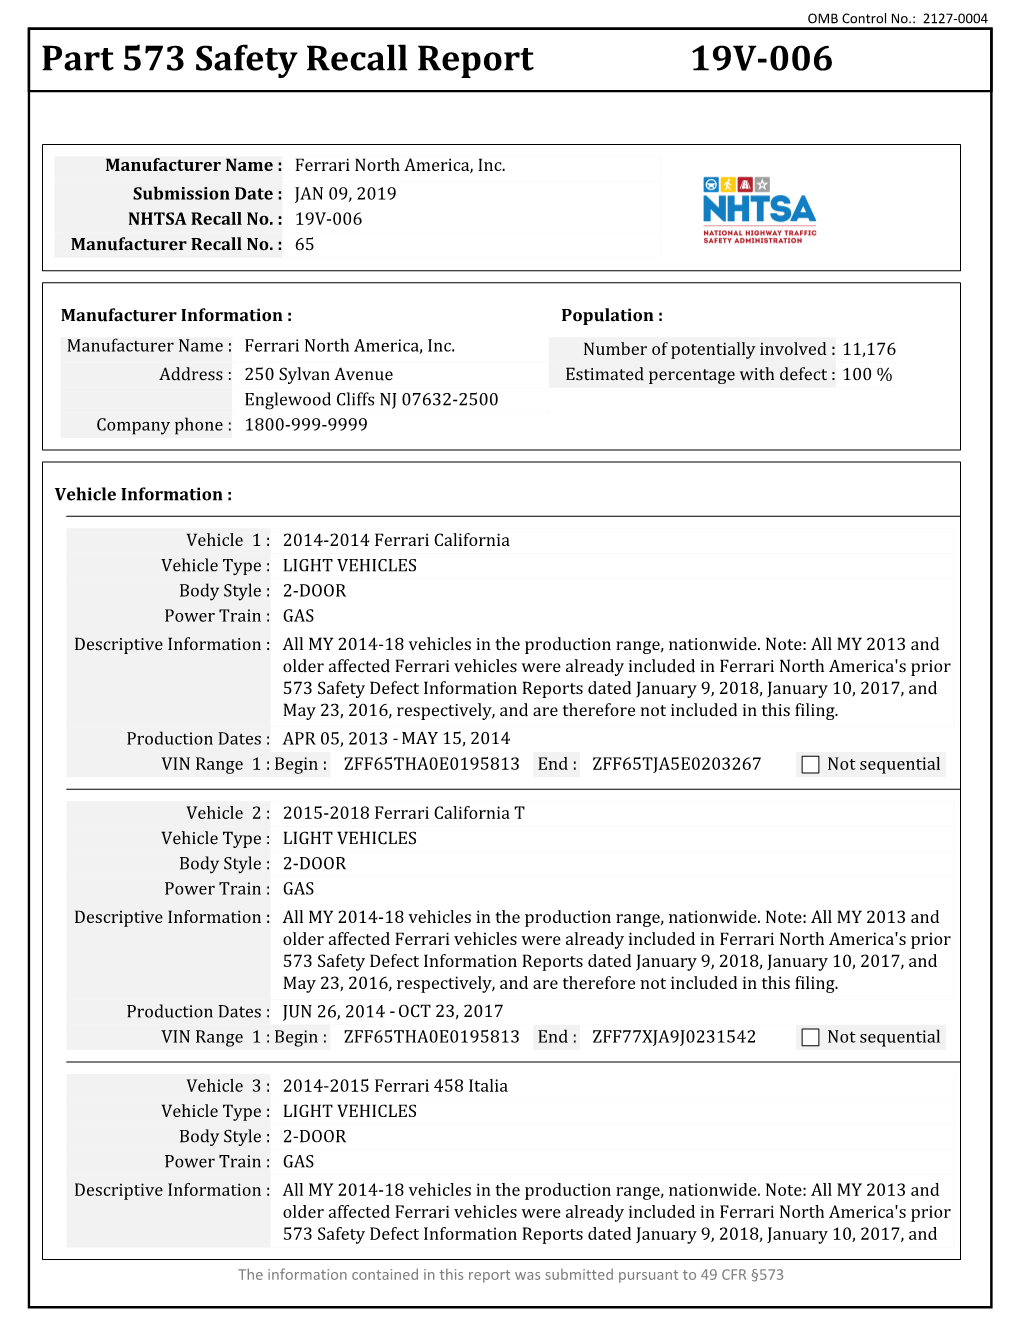 Part 573 Safety Recall Report 19V-006